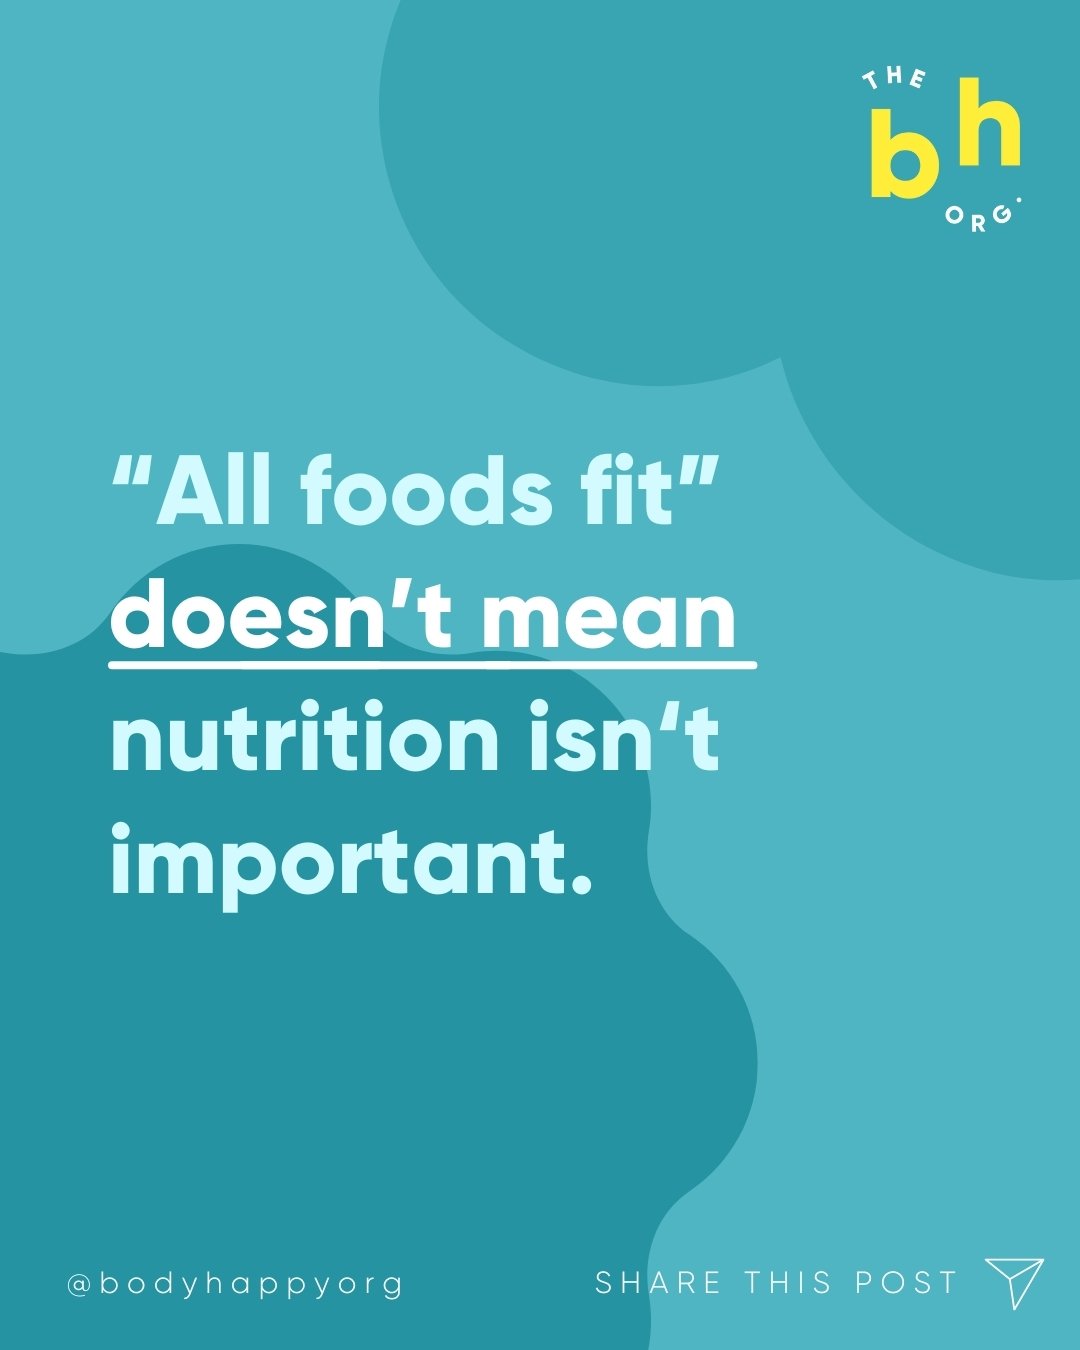 &quot;All foods fit&quot; doesn't mean nutrition isn't important. It just means it's not the ONLY thing that's important.

It also doesn't mean &quot;just give kids donuts all day&quot;. But neither does it mean just give them kale, or whatever your 